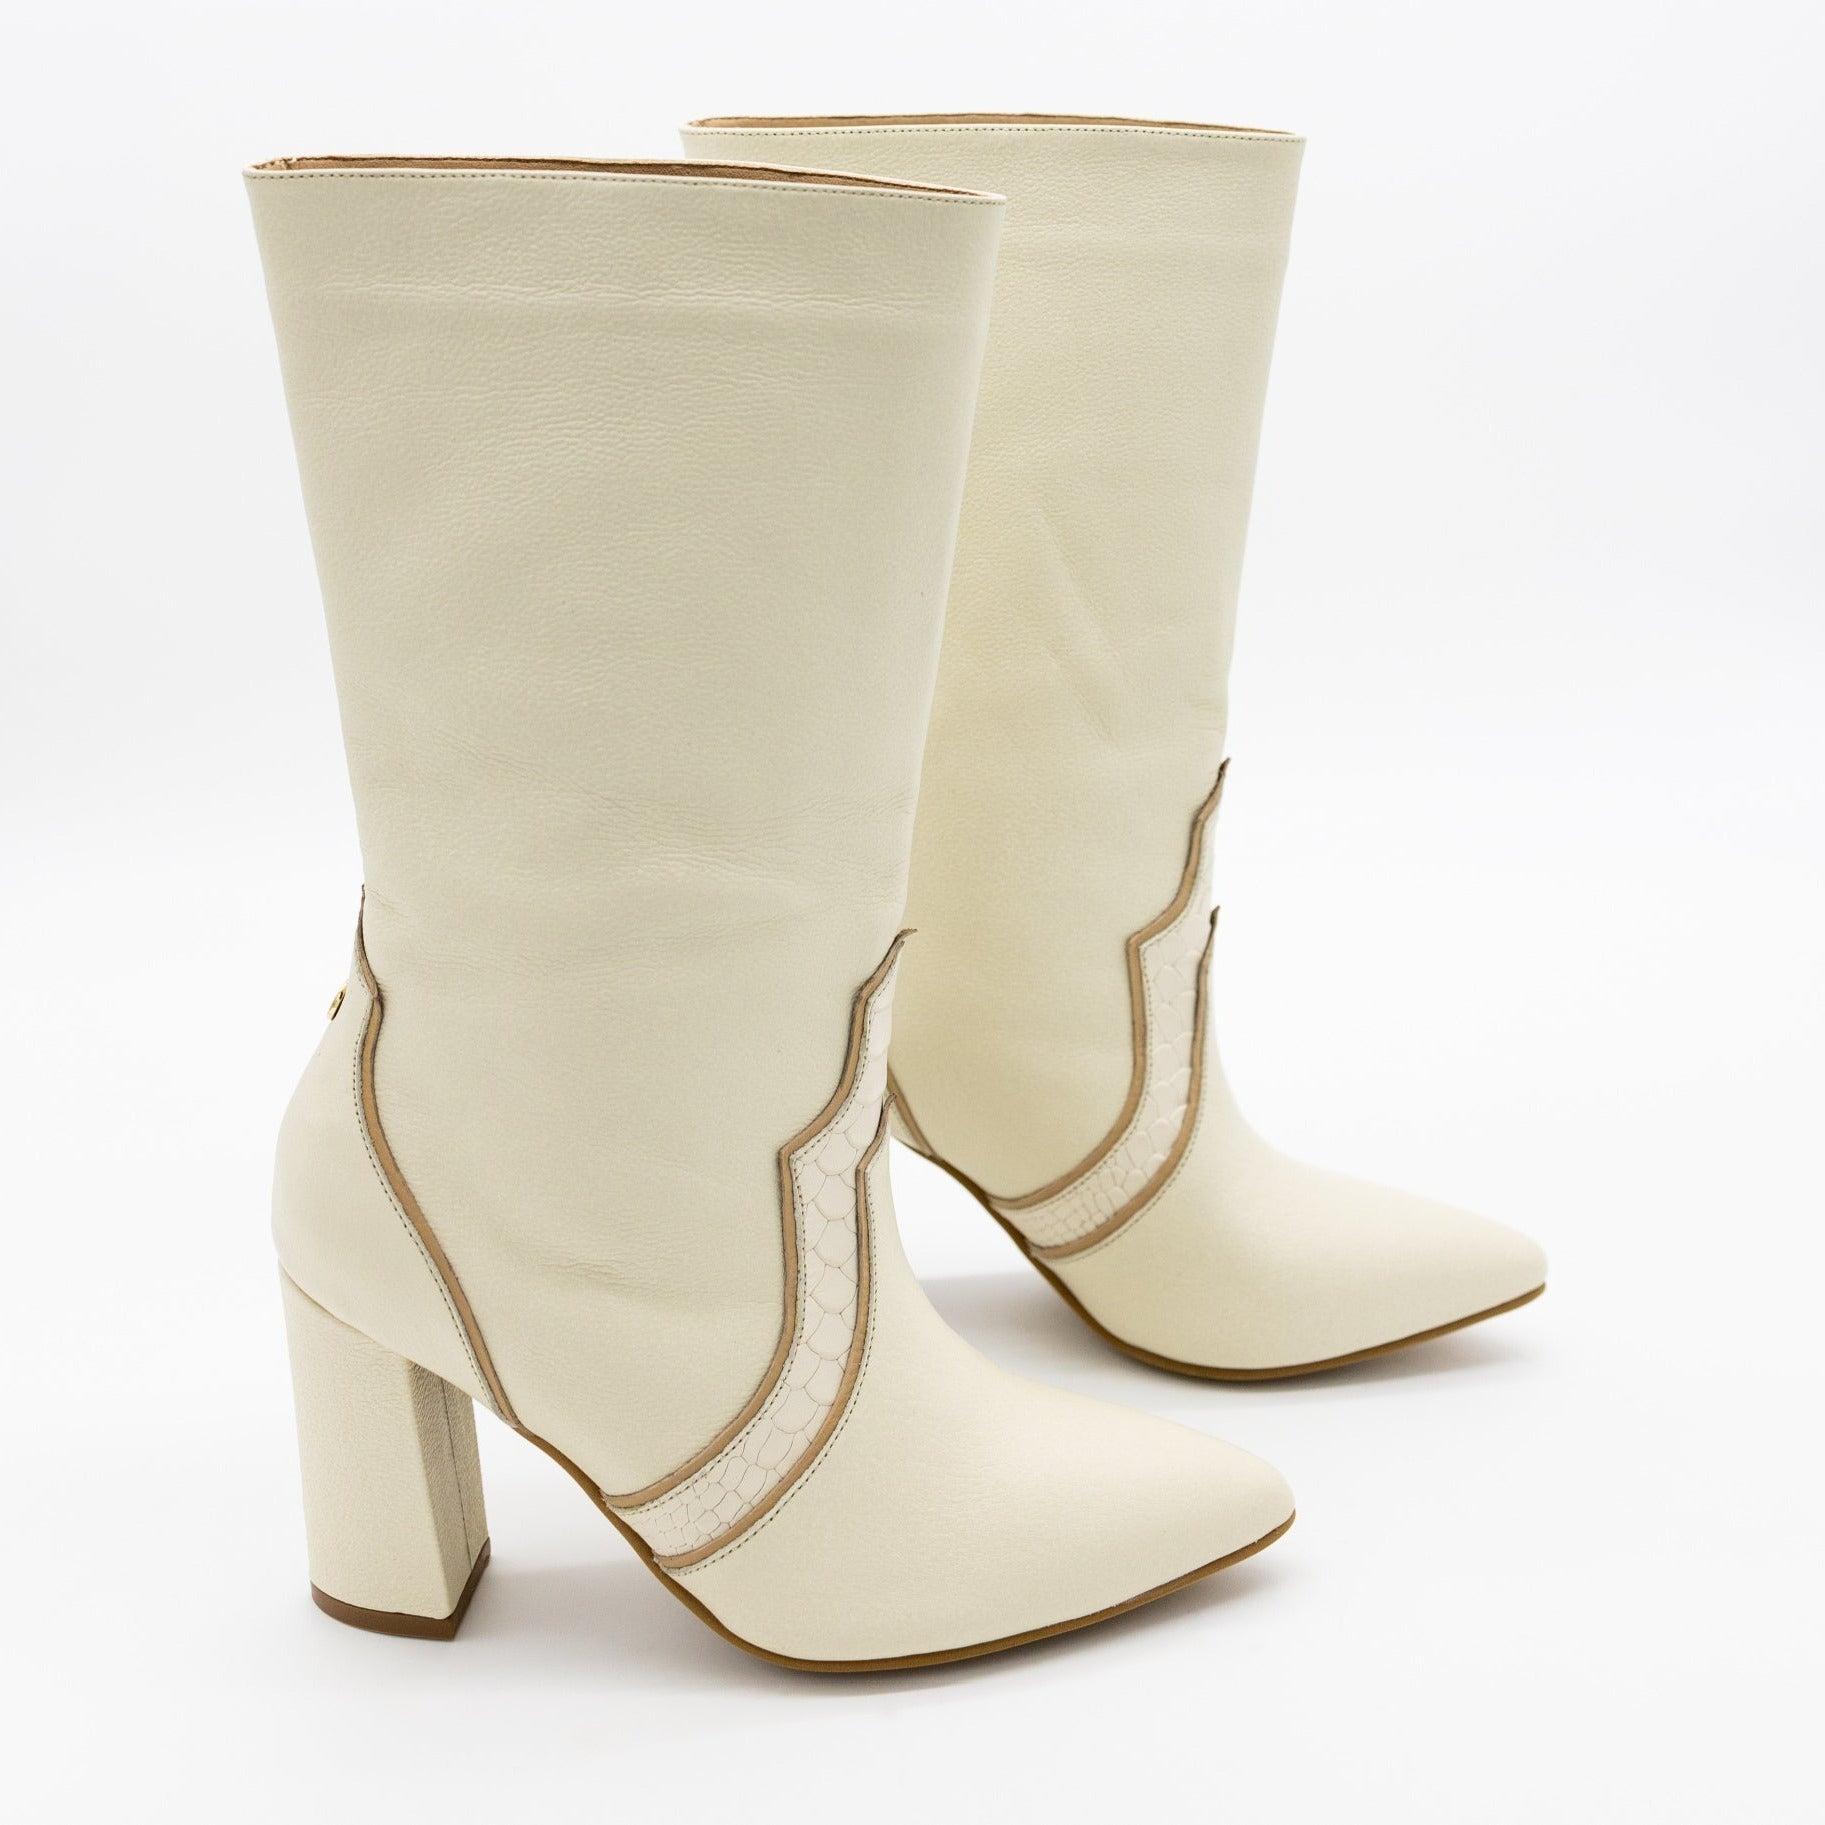 Handcrafted Leather Western Inspired Boots, Ivory White Smooth and Embossed Leather, and Tan Arequipe Smooth Leather. Stivali New York